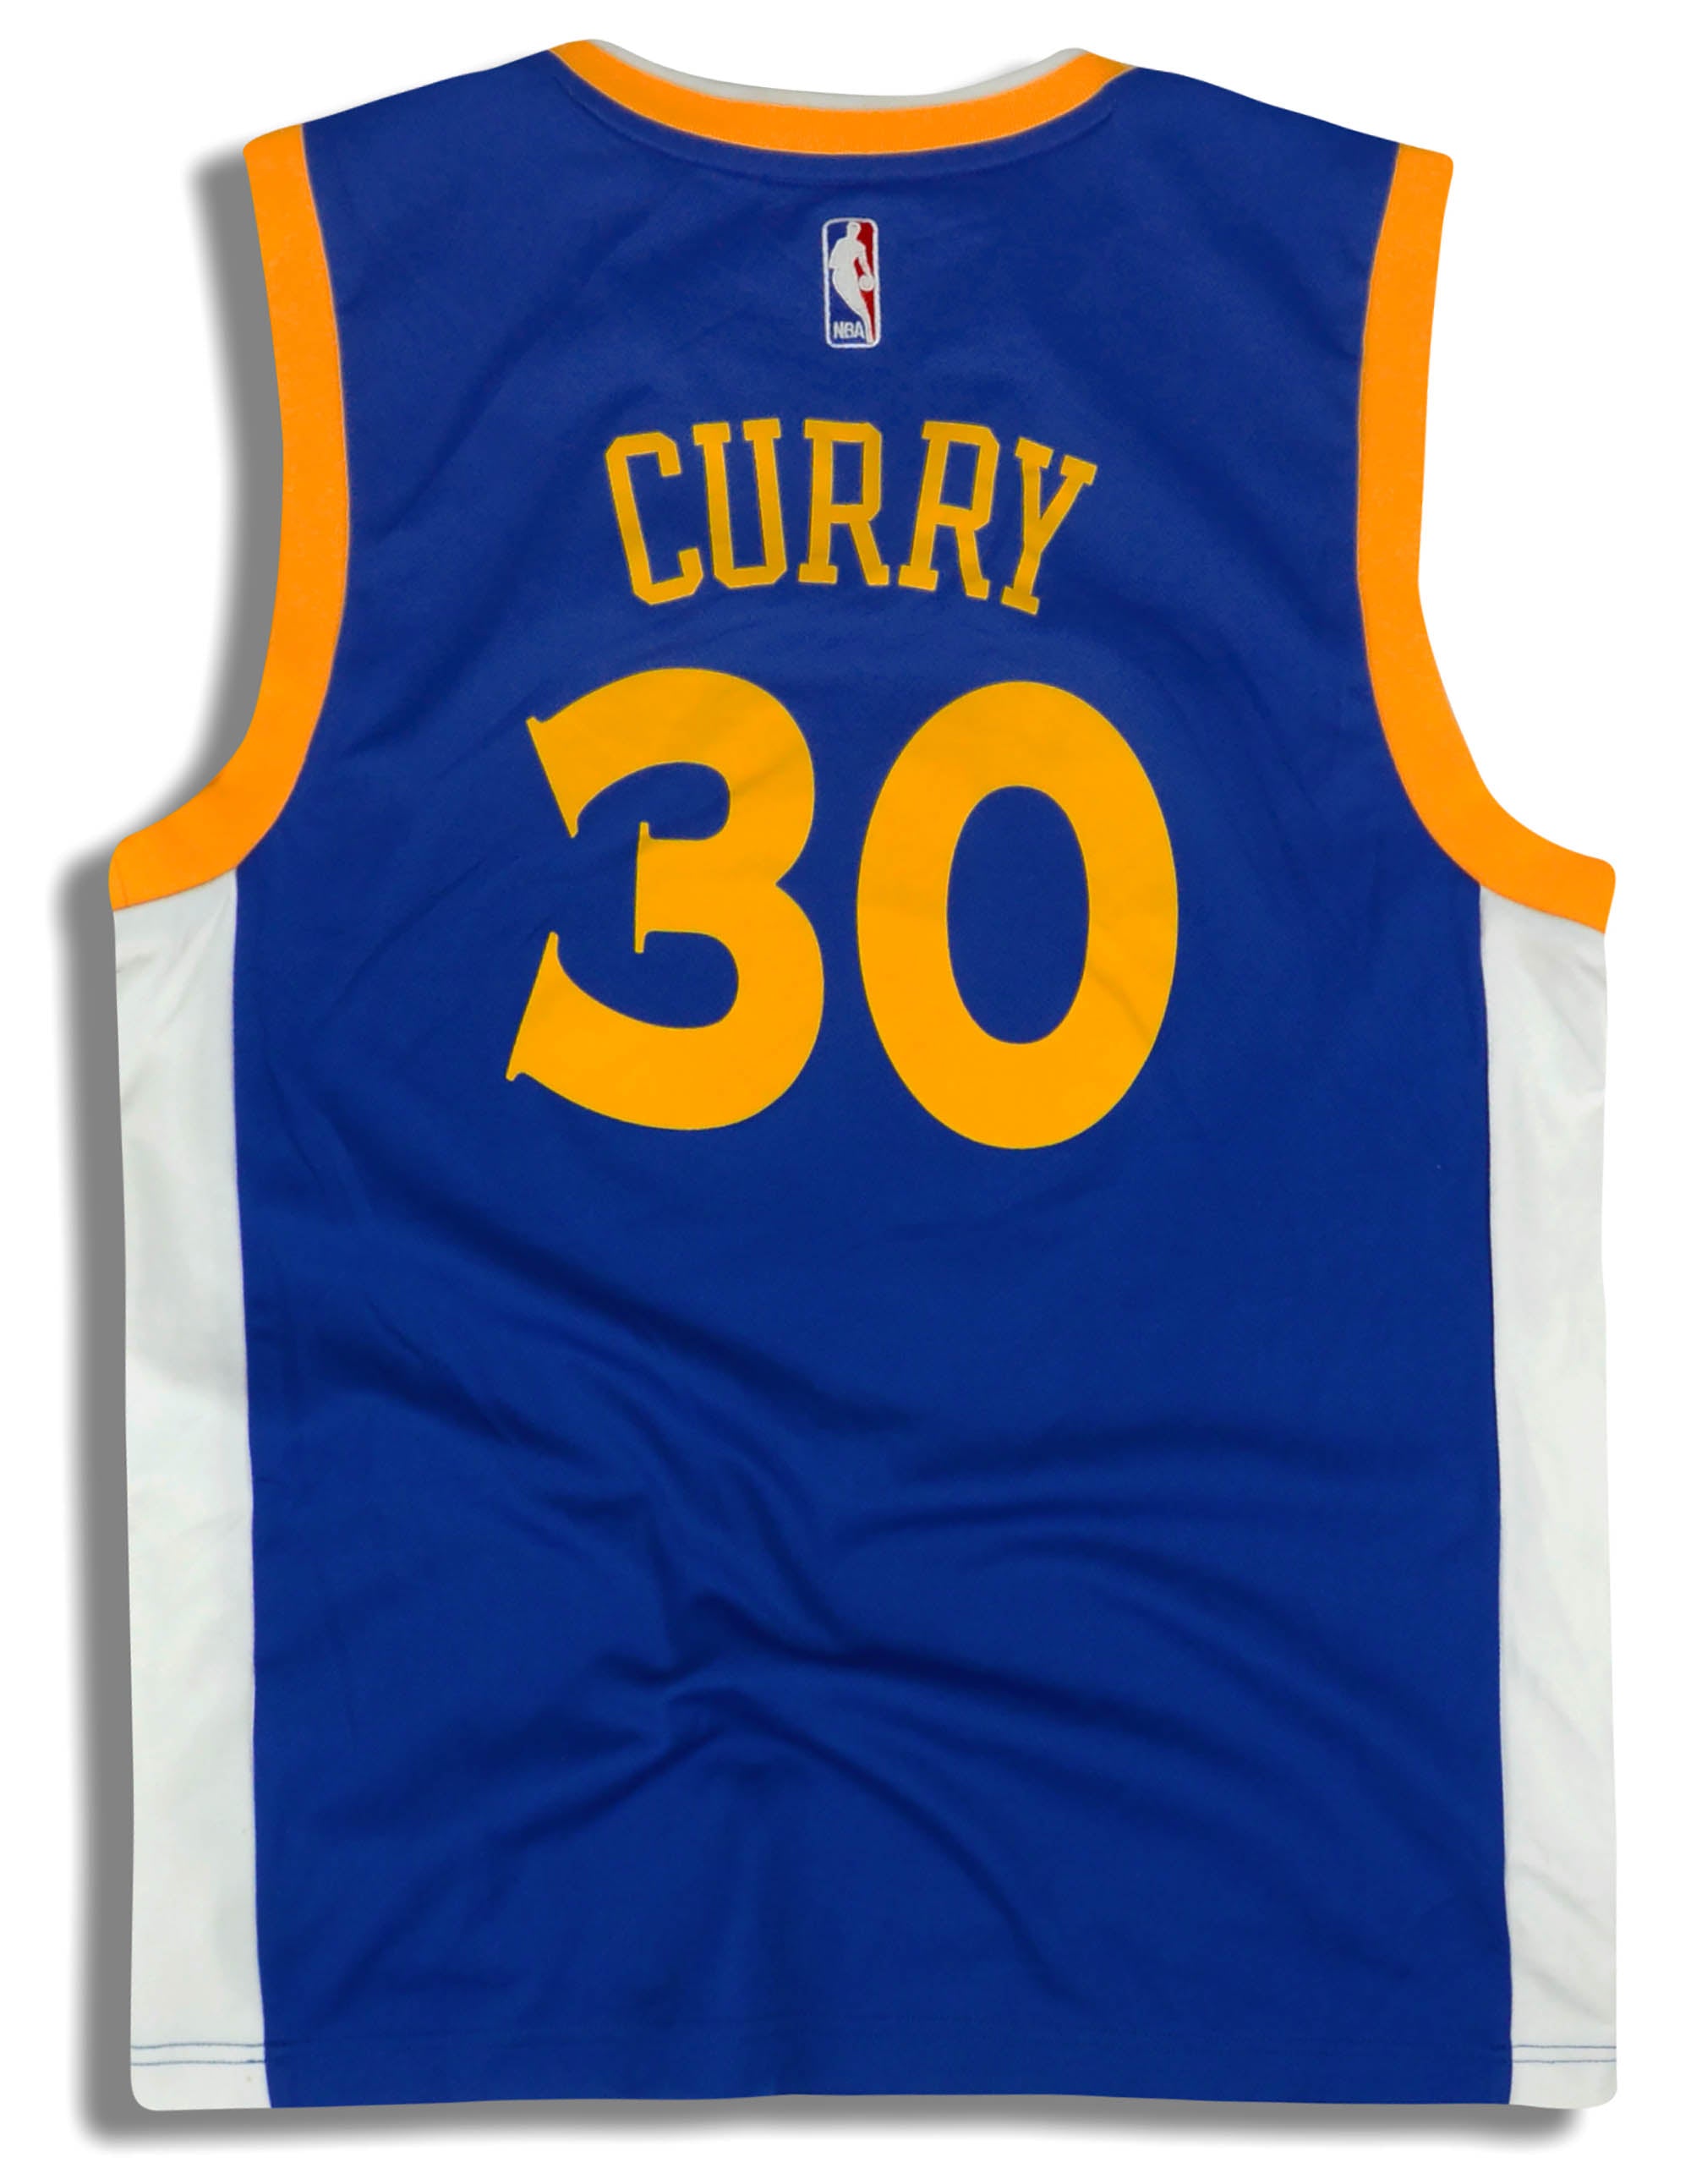 steph curry hardwood classic jersey